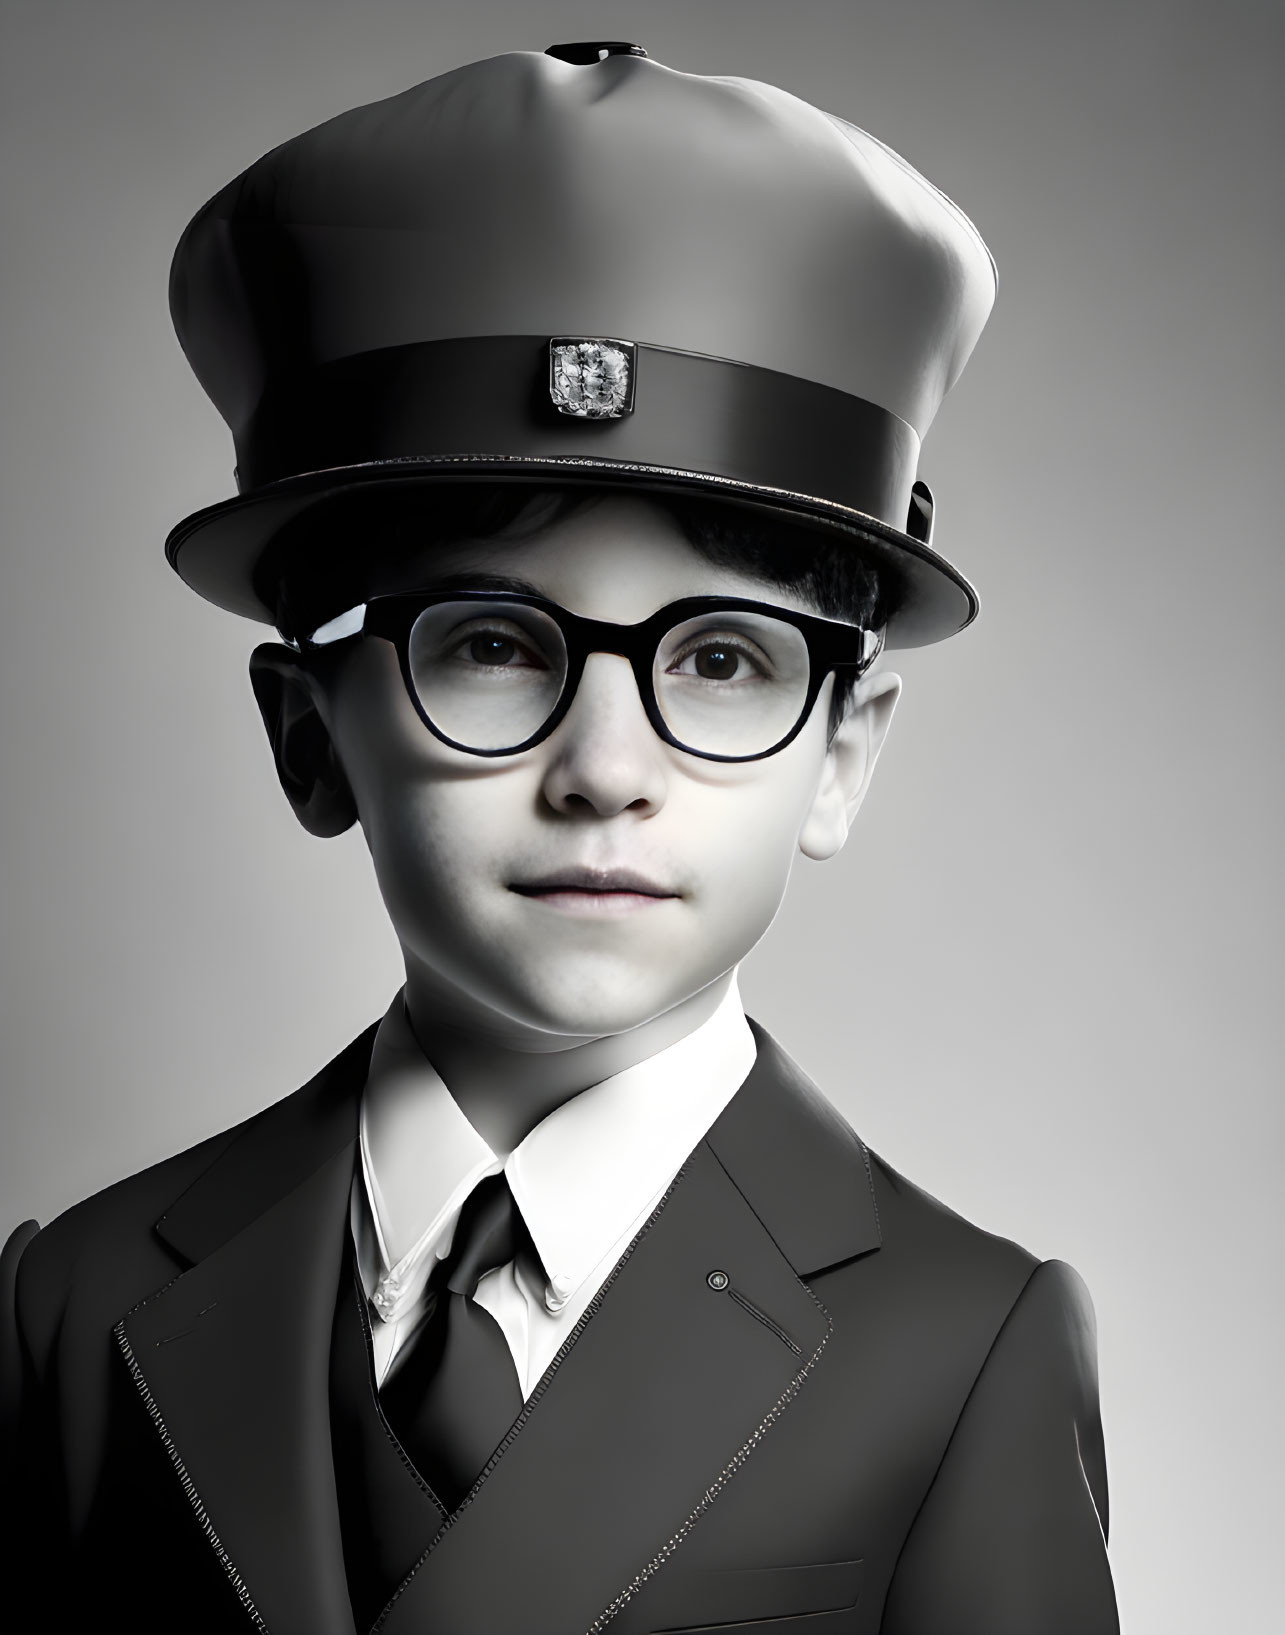 Monochromatic image of young boy in suit with oversized glasses and police hat